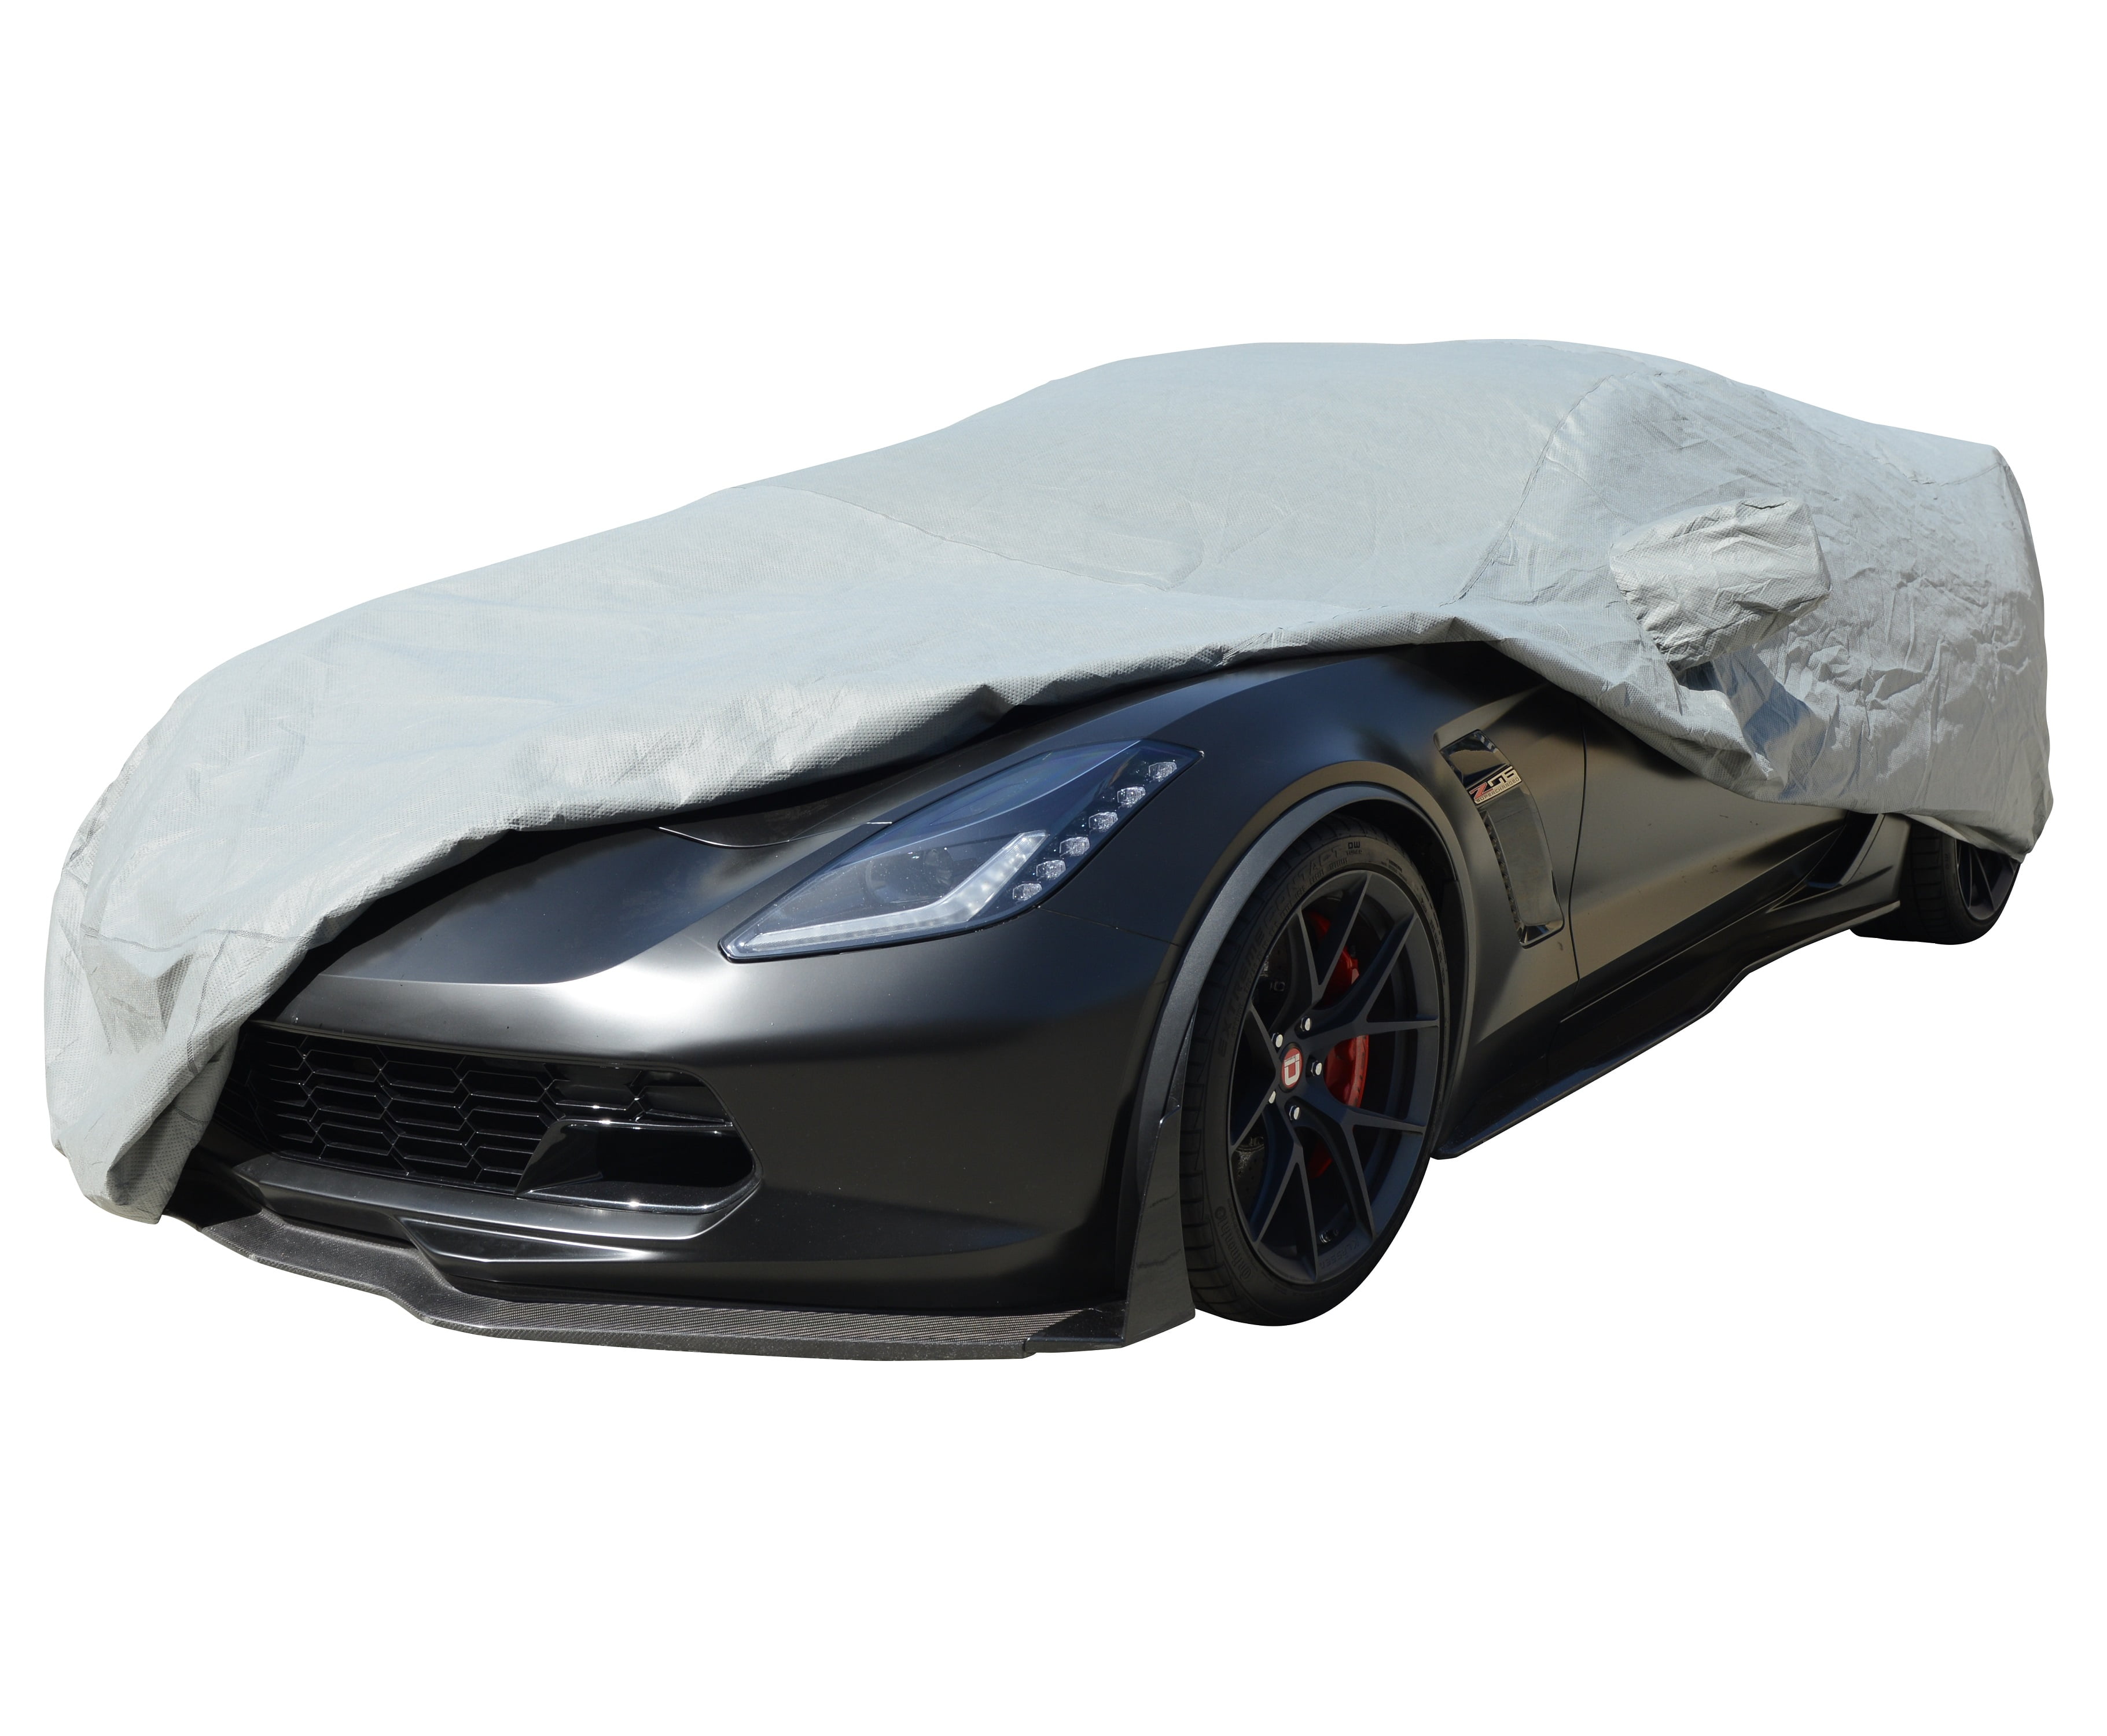 Custom Car Cover Waterproof Cotton Gray for Ford Mustang GT Corba Shelby 2015 2016 2017 2018